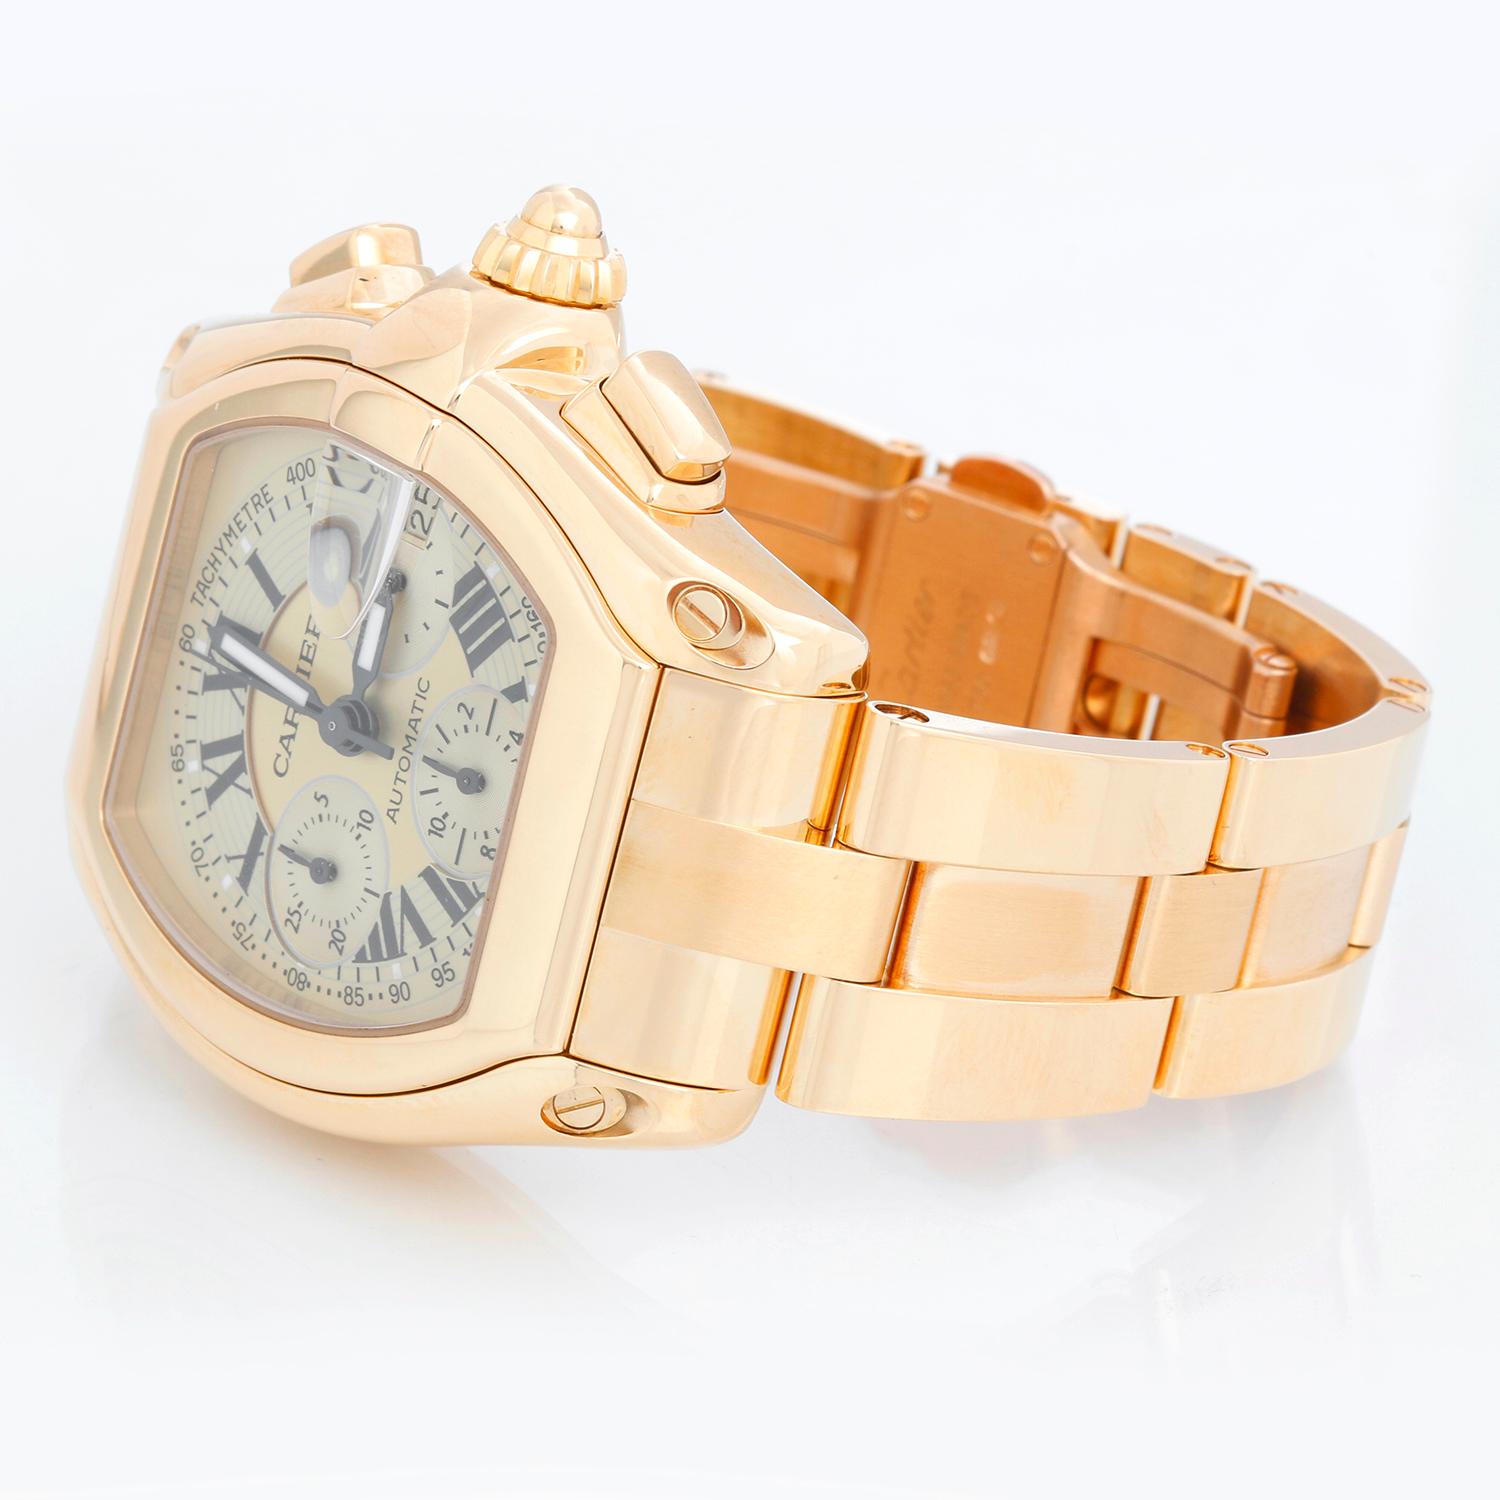 Cartier Roadster Chronograph XL 18k Yellow Gold Men's Watch 2619 - Automatic winding; chronograph with date. 18k yellow gold case (43 mm x 47mm). Champagne Dial with subdials. Cartier 18k yellow gold bracelet. Pre-owned with Cartier box and books.